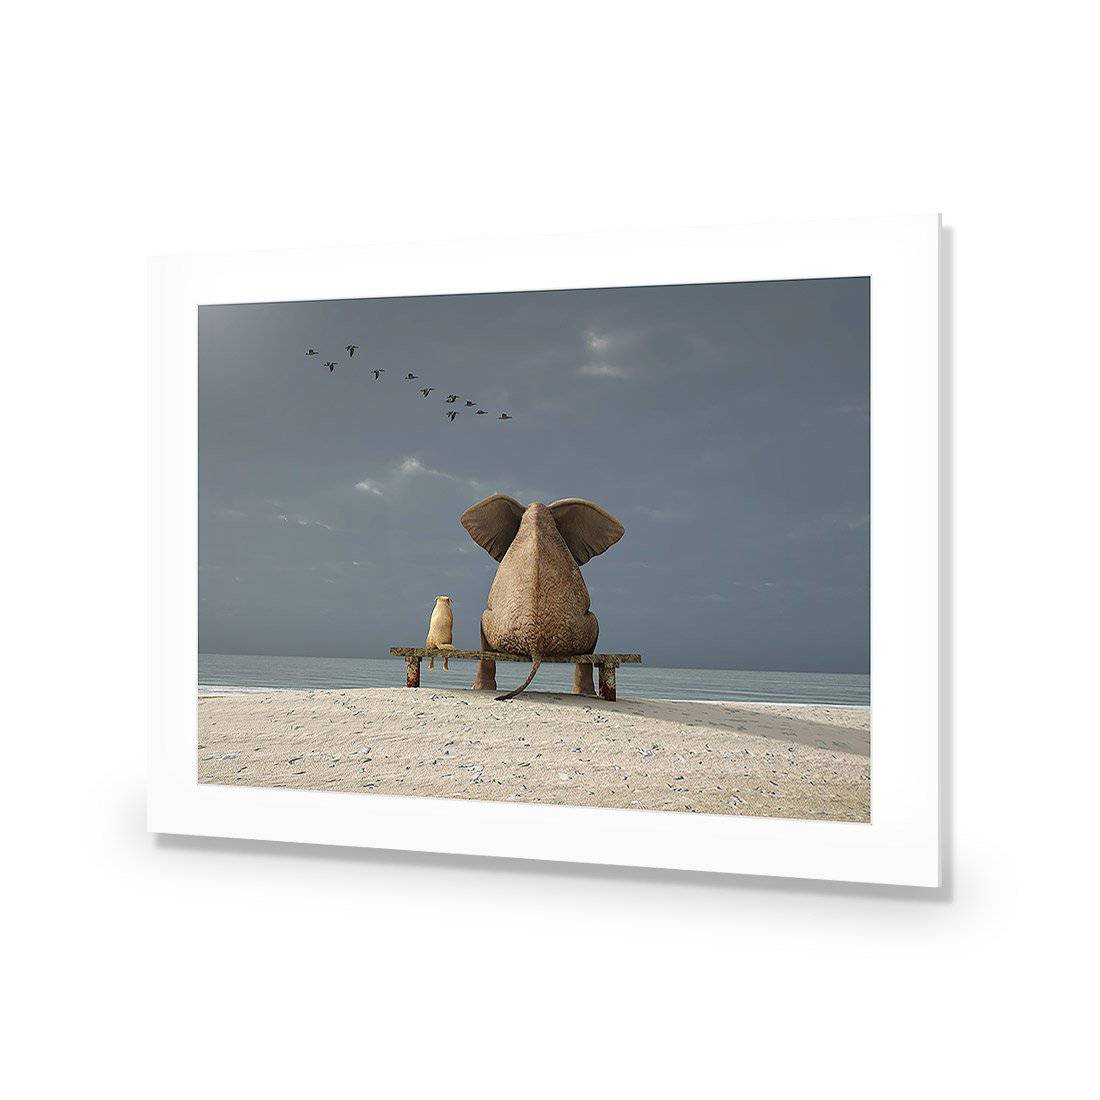 Little And Large-Acrylic-Wall Art Design-With Border-Acrylic - No Frame-45x30cm-Wall Art Designs